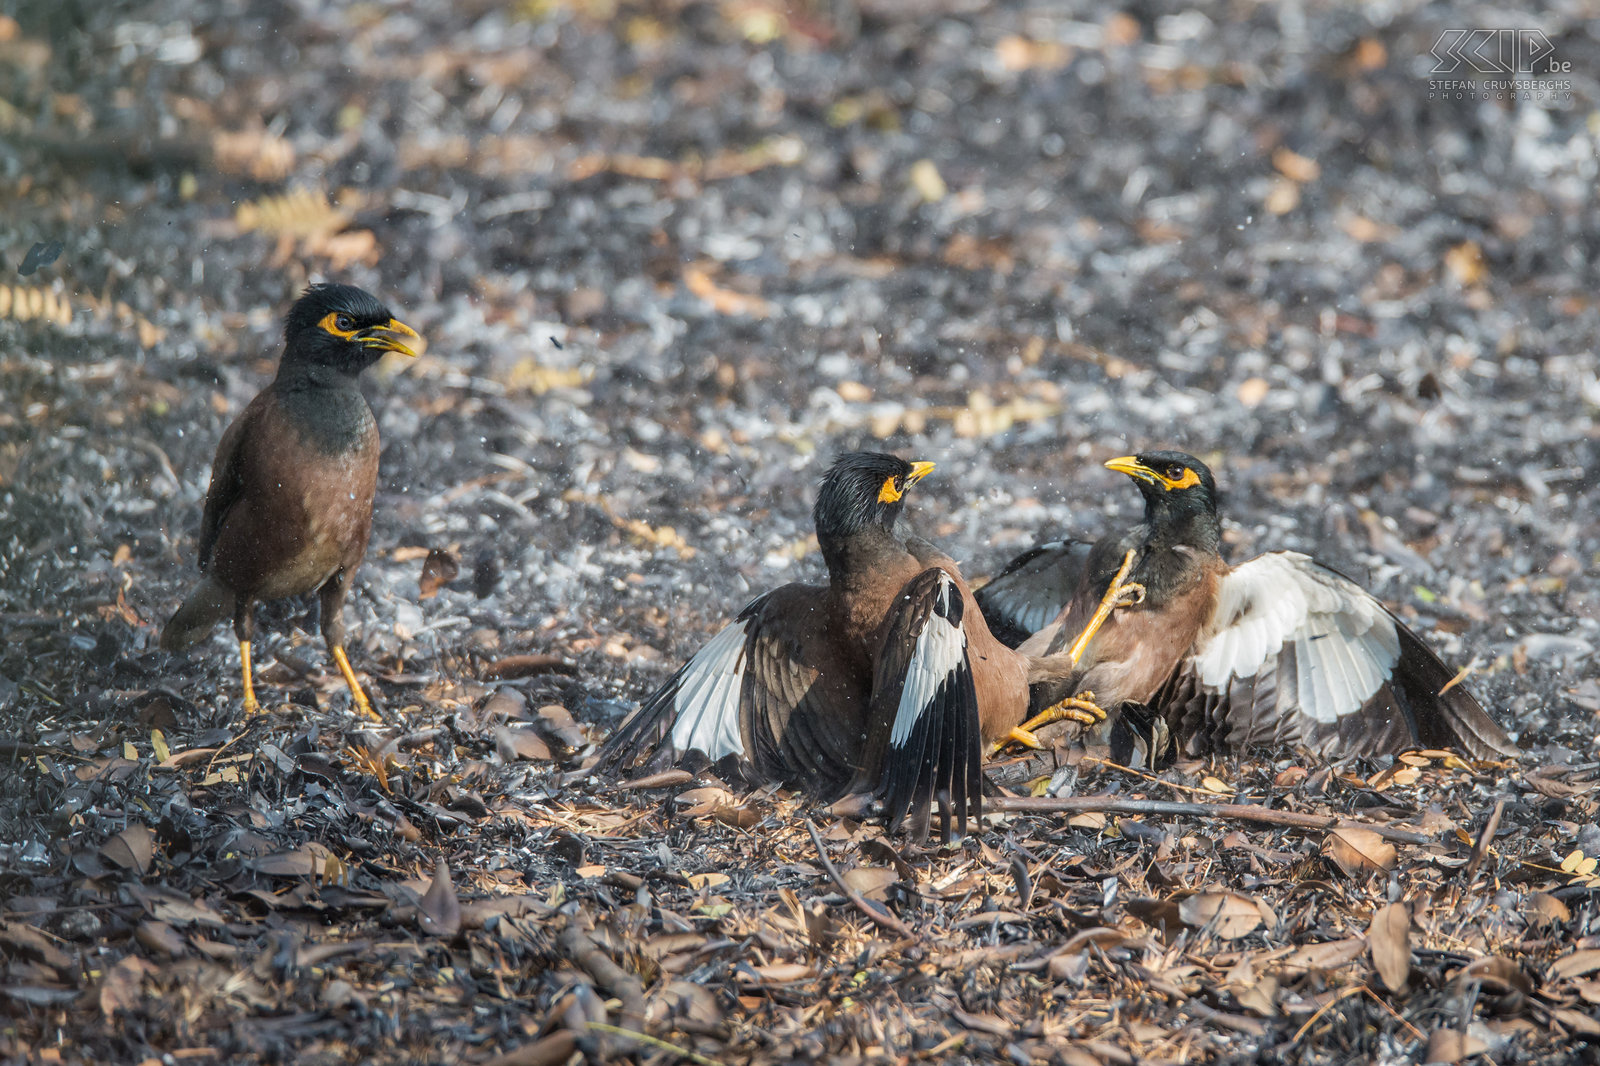 Kabini - Fighting Jungle mynas We also encountered some jungle mynas (Acridotheres fuscus) that were engaged in a fierce fight. The third bird seemed to be the 'referee'. Stefan Cruysberghs